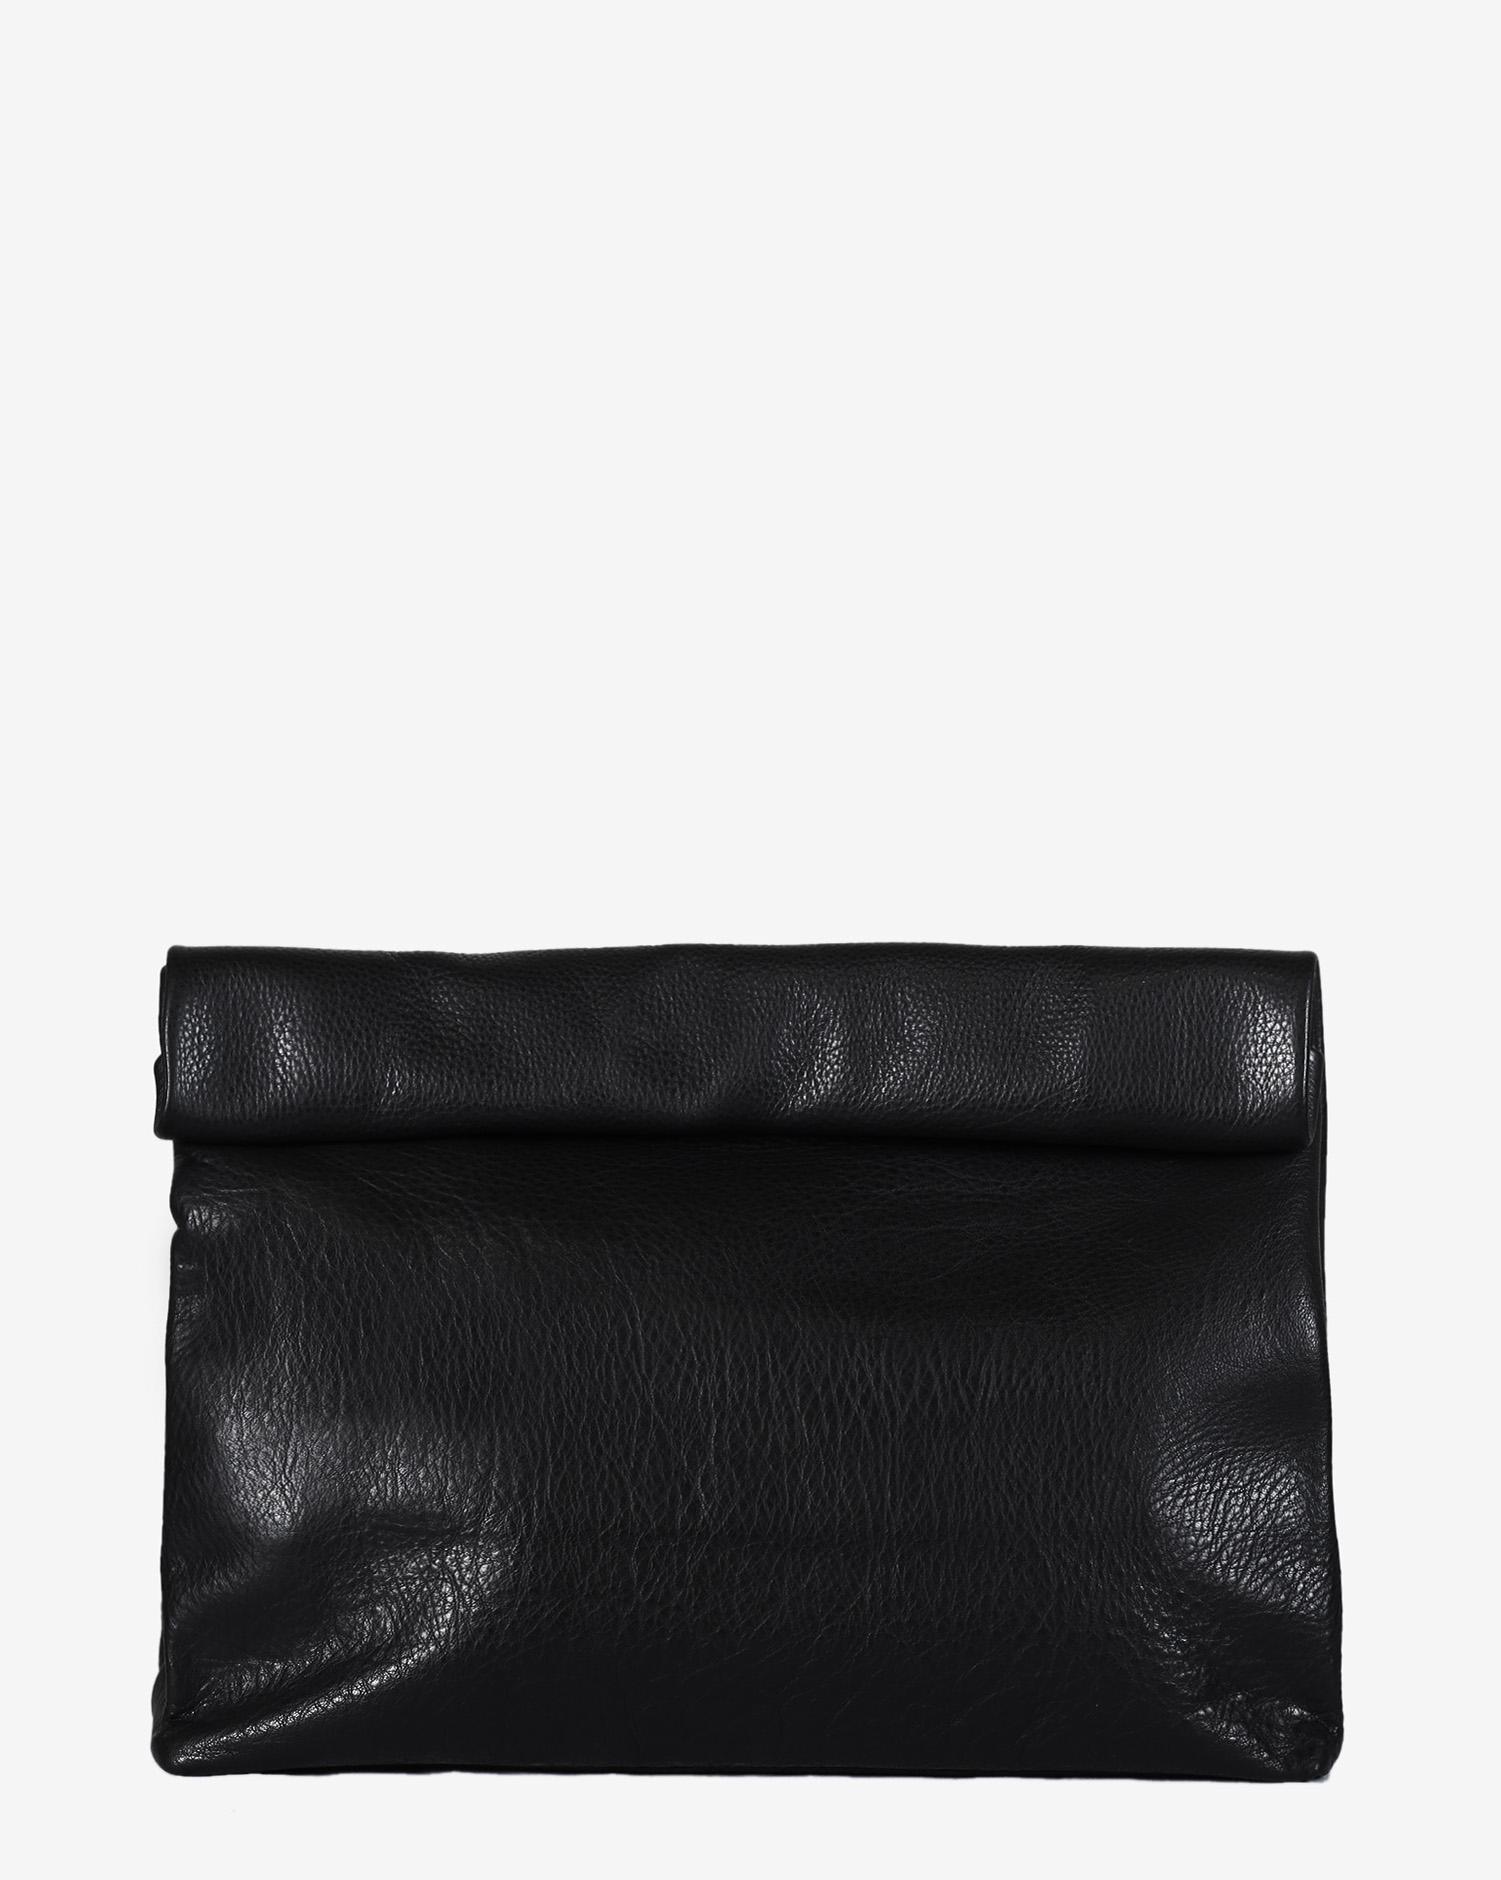 Marie Turnor Lunch Clutch - Pebble Black  